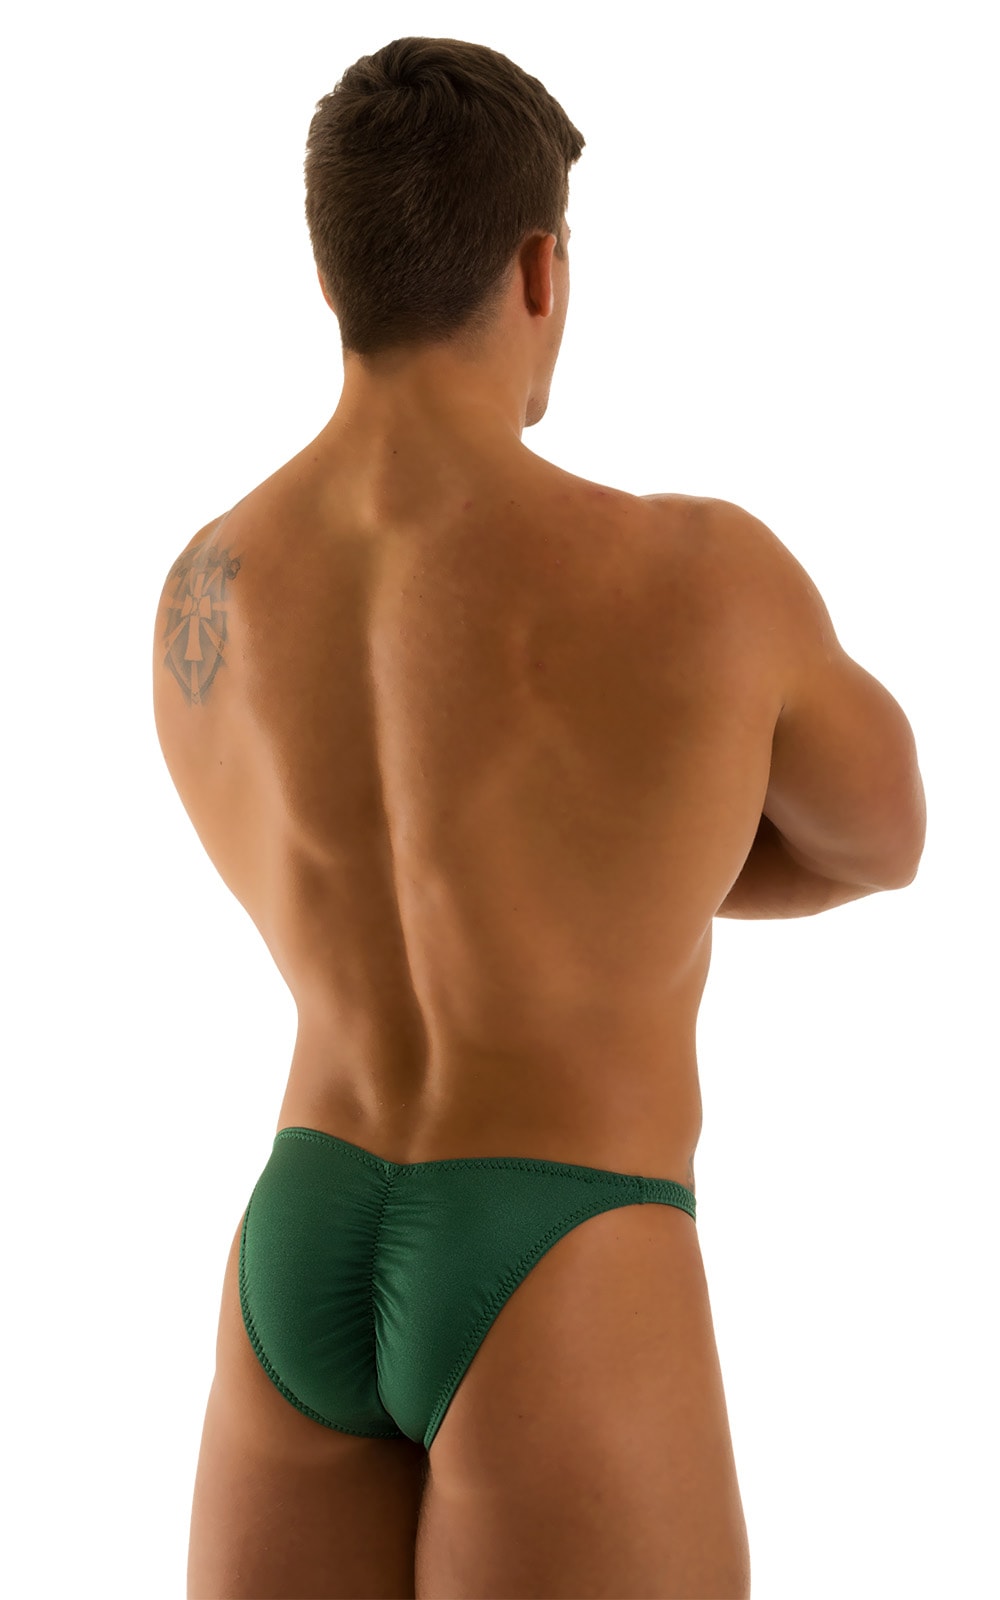 Fitted Pouch - Puckered Back - Posing Suit in Hunter Green, Rear View